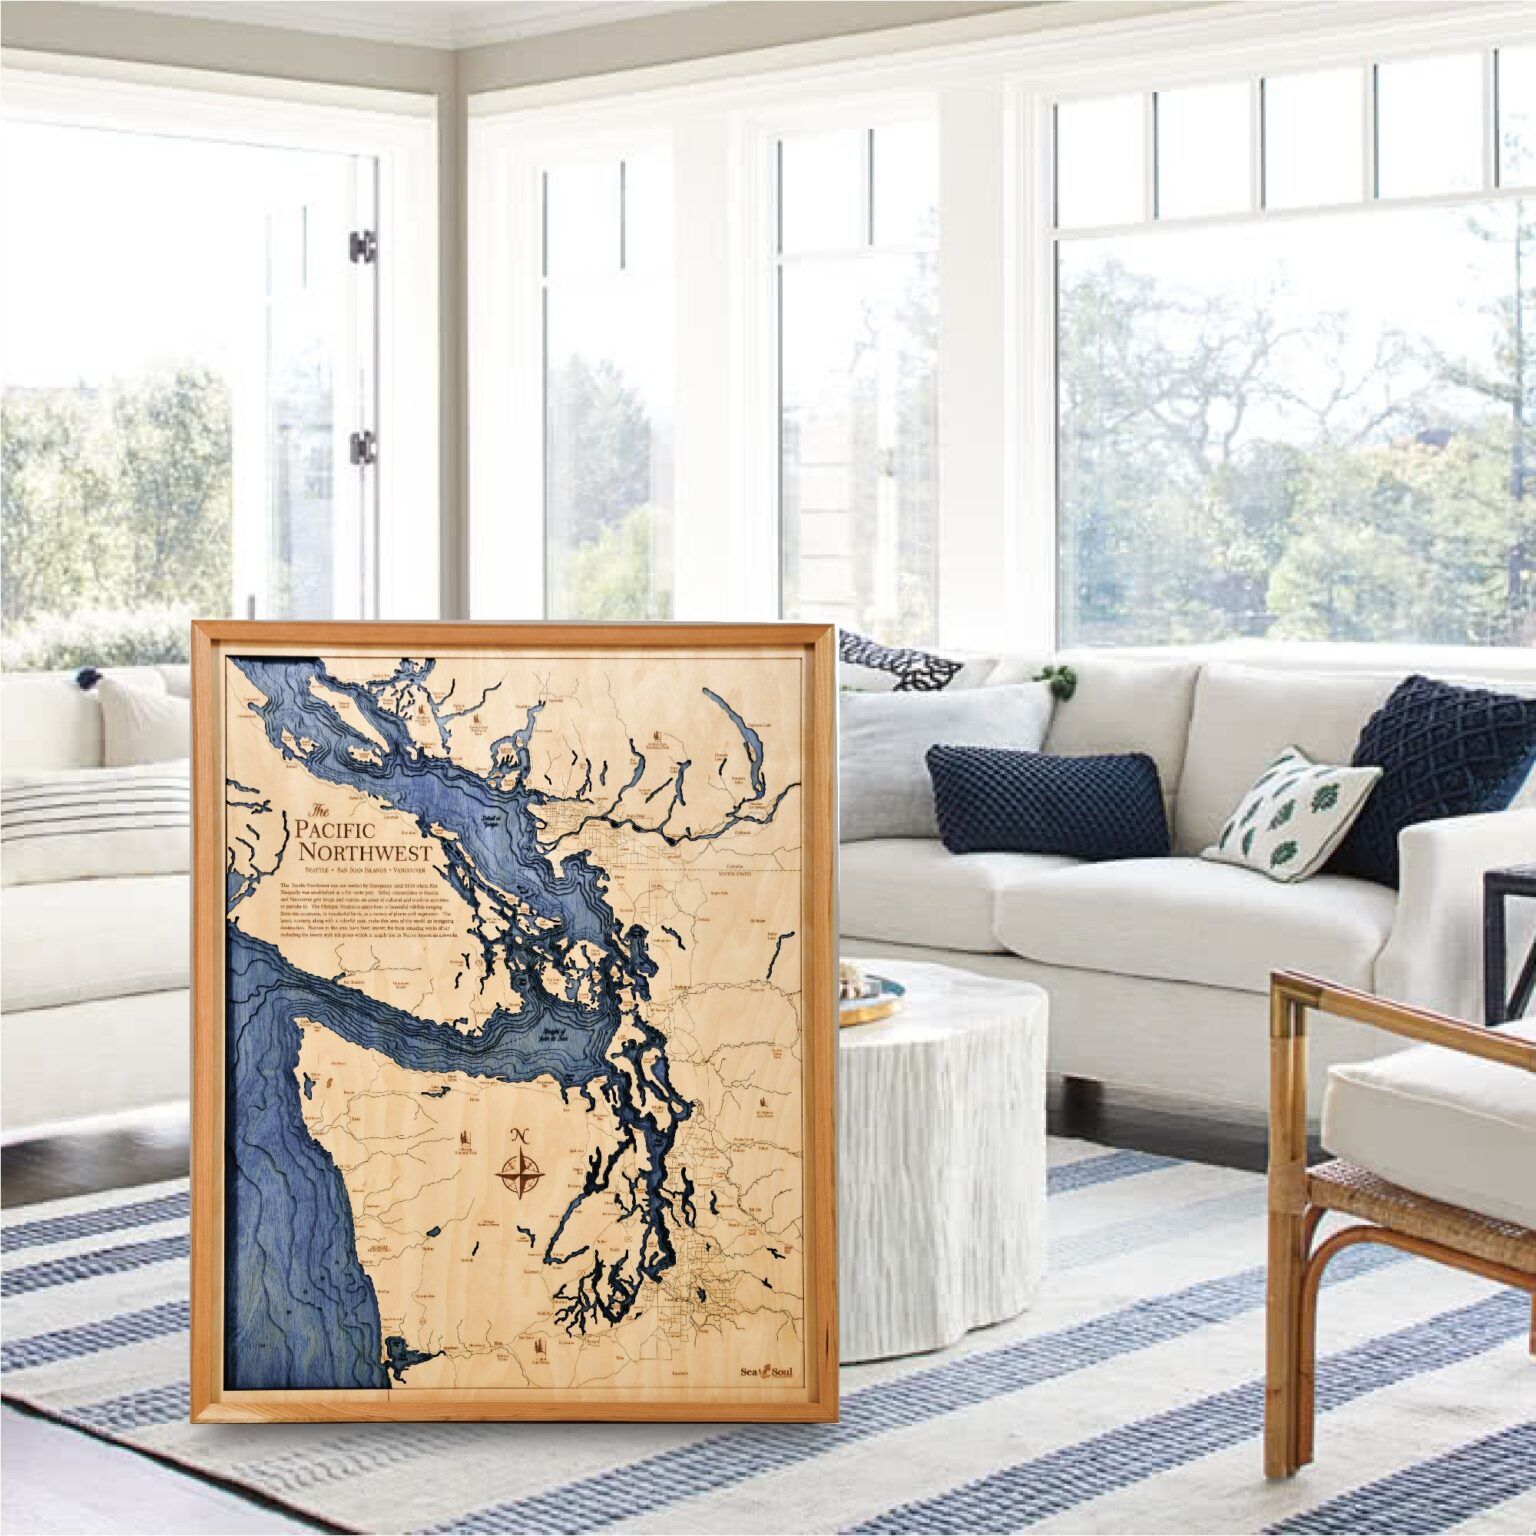 Pacific Northwest Nautical Wood Chart | 3d Wall Art 24"x30" | Sea And Pertaining To Most Recently Released Northwest Wall Art (View 12 of 20)